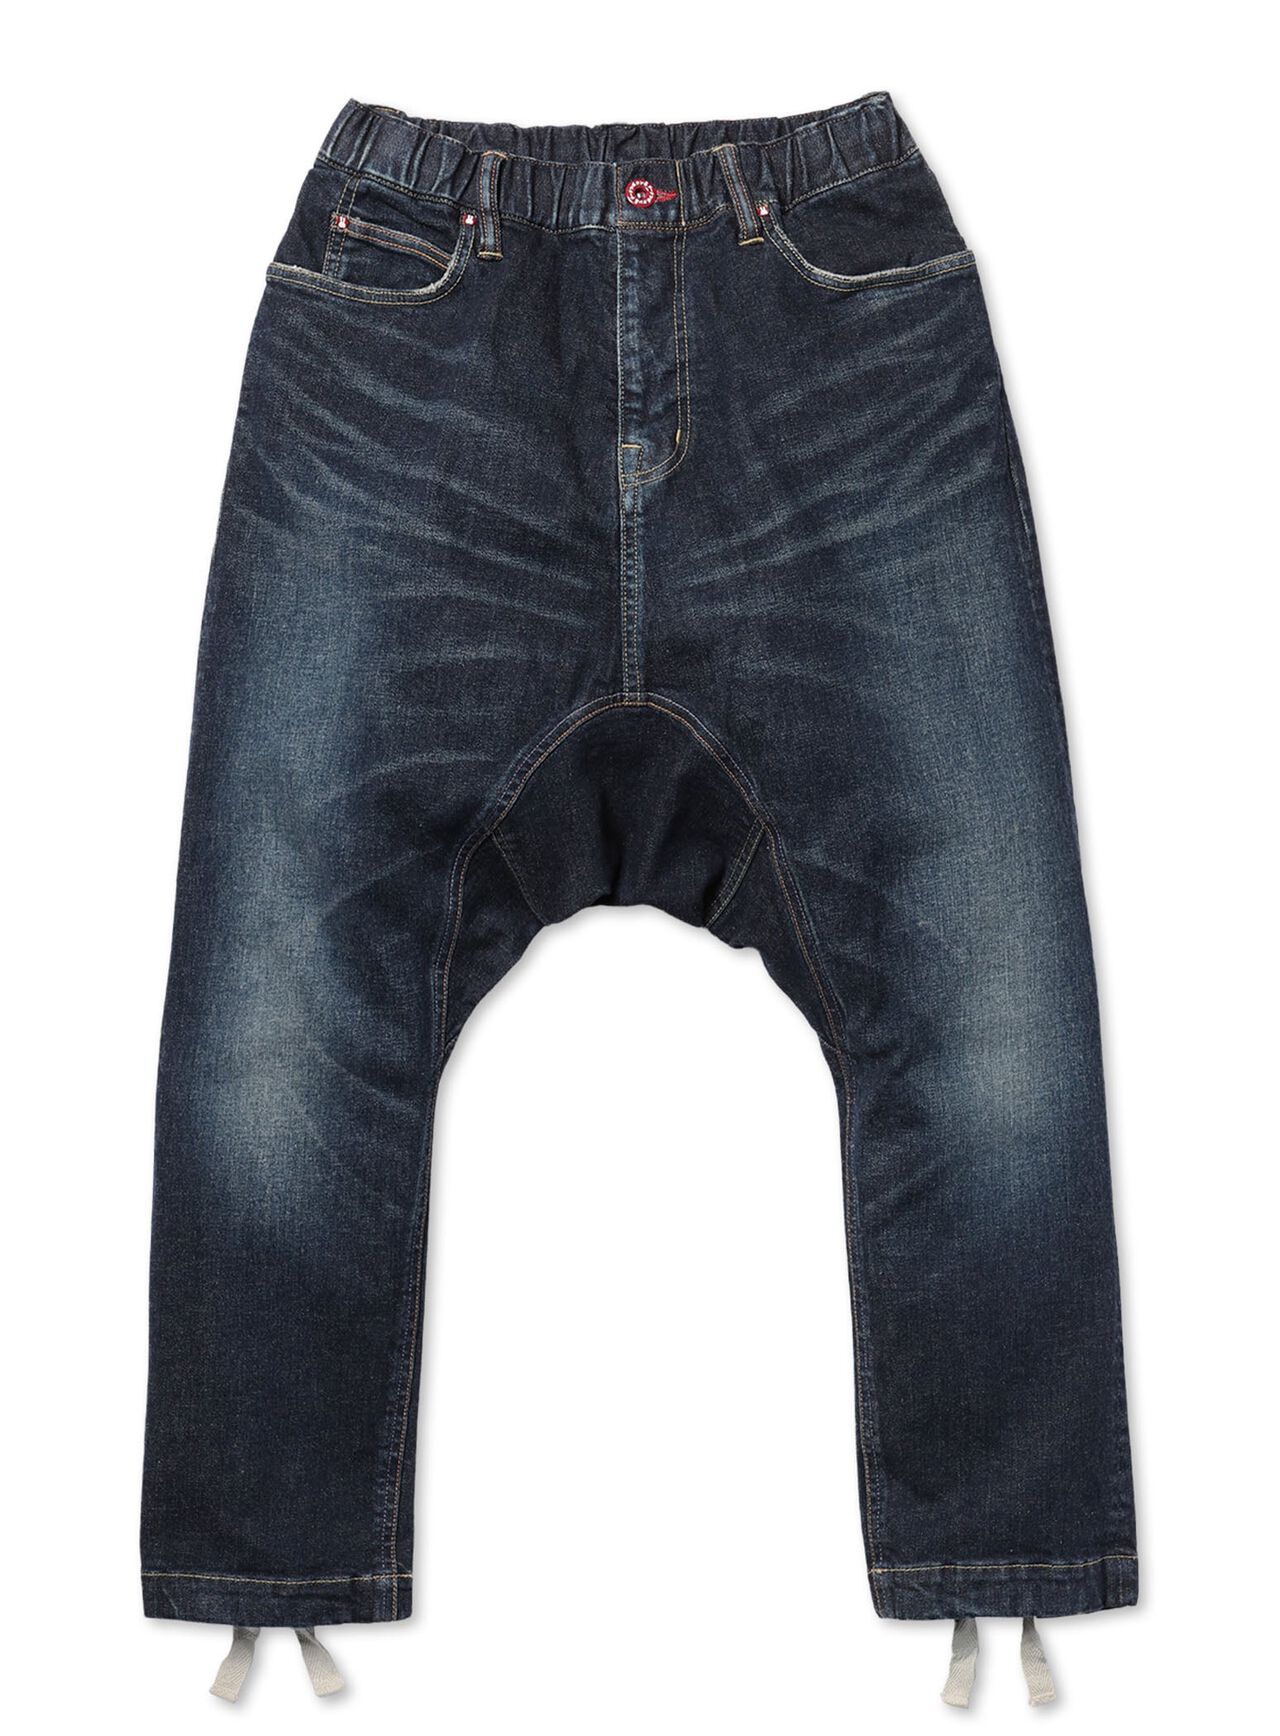 Jeans - Crotch 22-U2 3 years,M, large image number 1